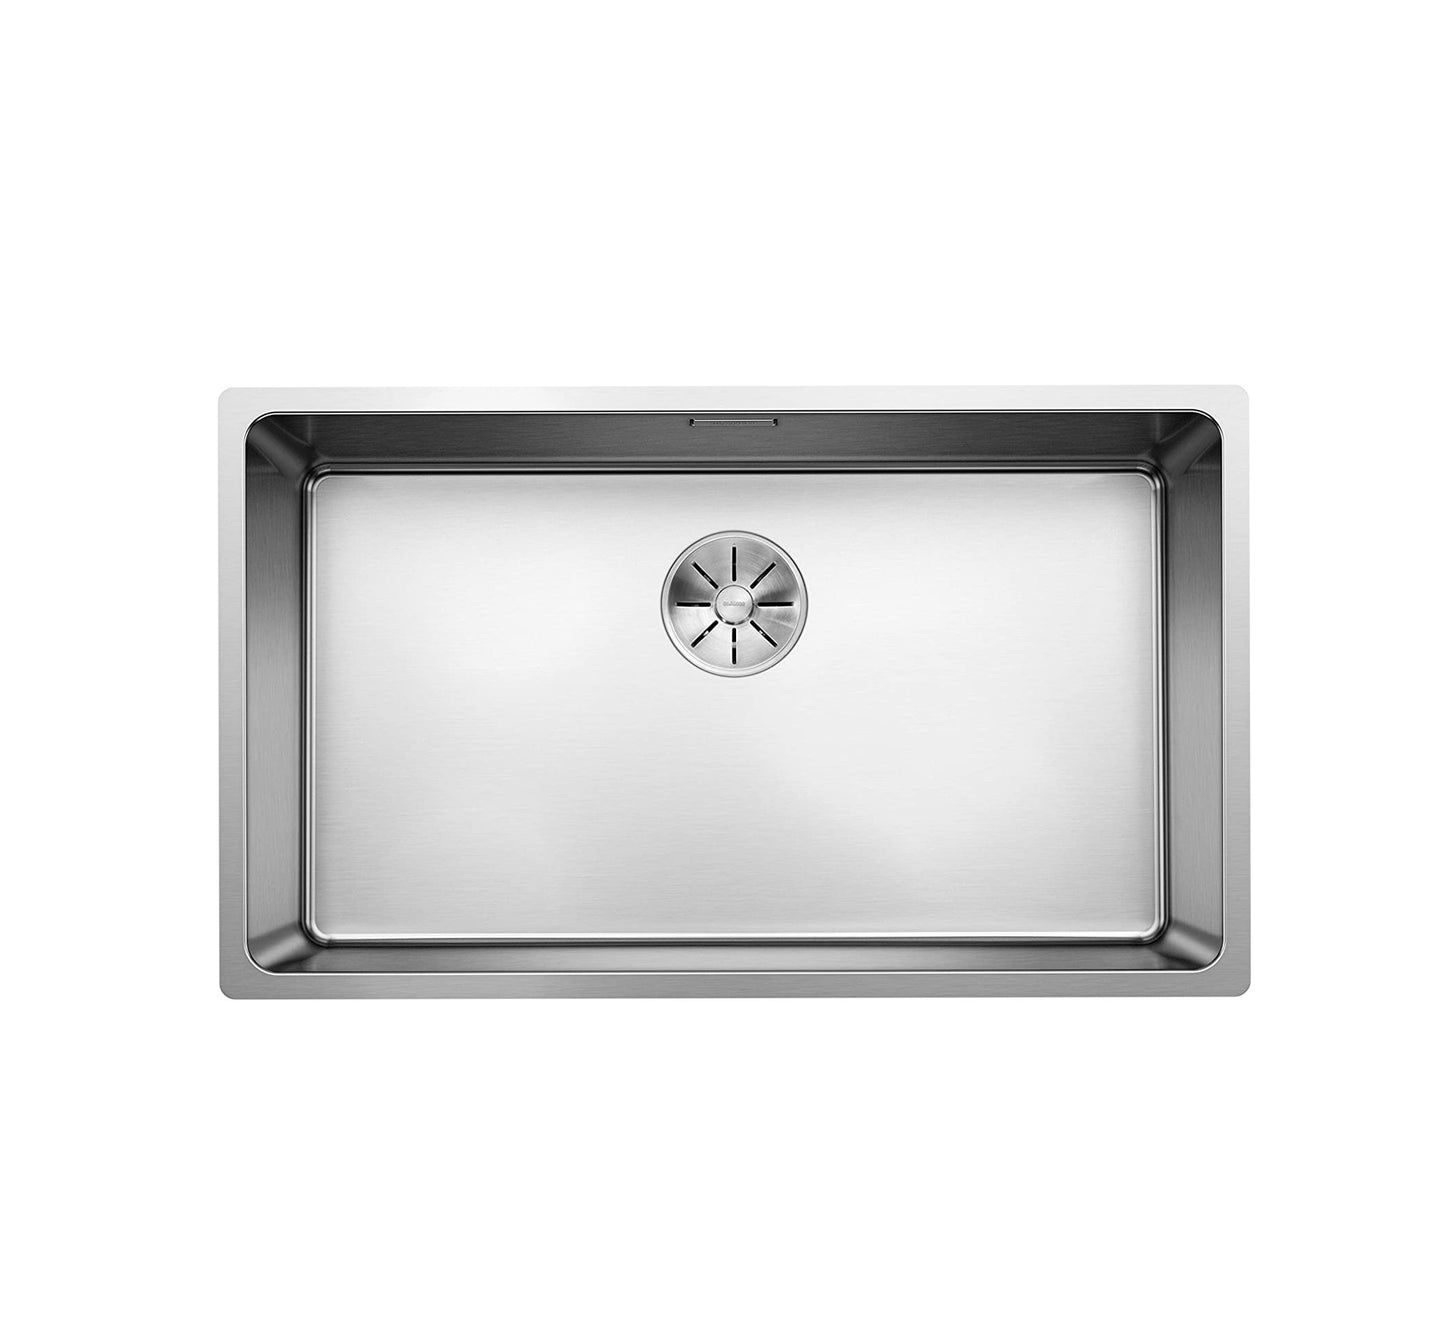 BLANCO ANDANO 700-IF INSET/FLUSHMOUNT/UNDERMOUNT KITCHEN SINK 1 BOWL WITH BASKET STRAINER AND WASTE AND OVERFLOW FITTINGS 740X440MM - 522969 - Tadmur Trading